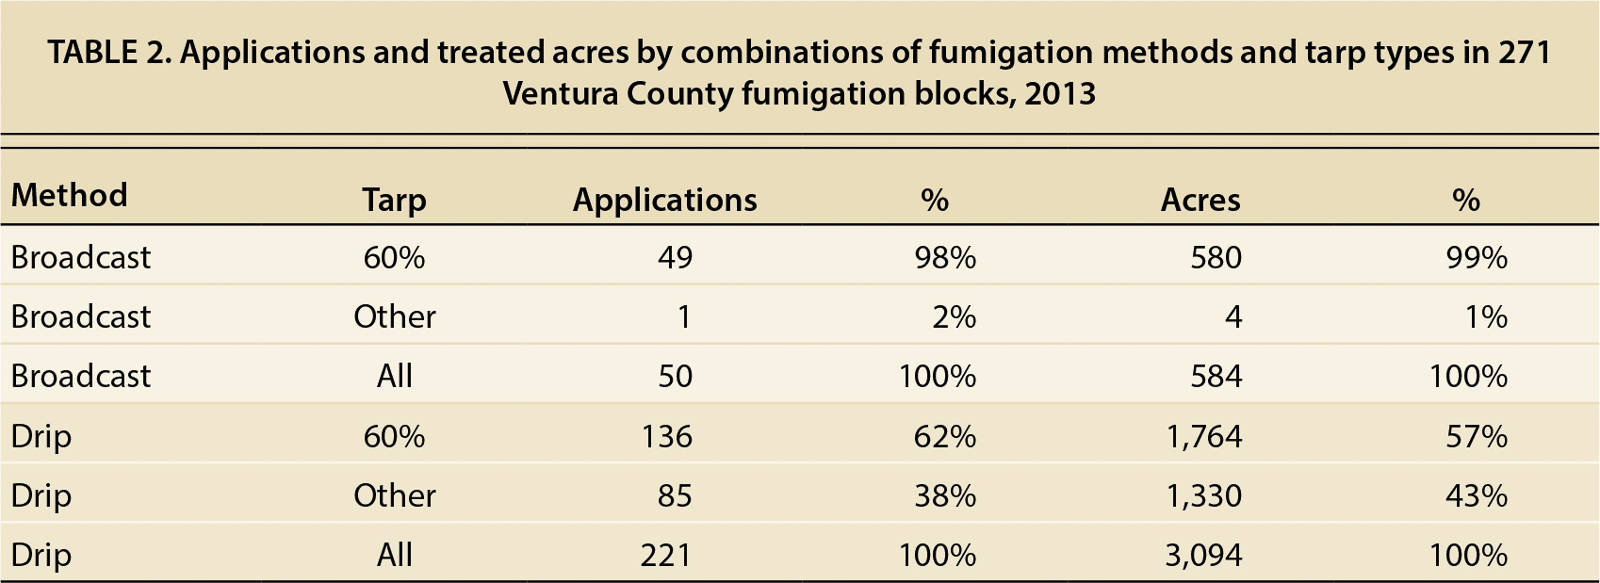 Applications and treated acres by combinations of fumigation methods and tarp types in 271 Ventura County fumigation blocks, 2013